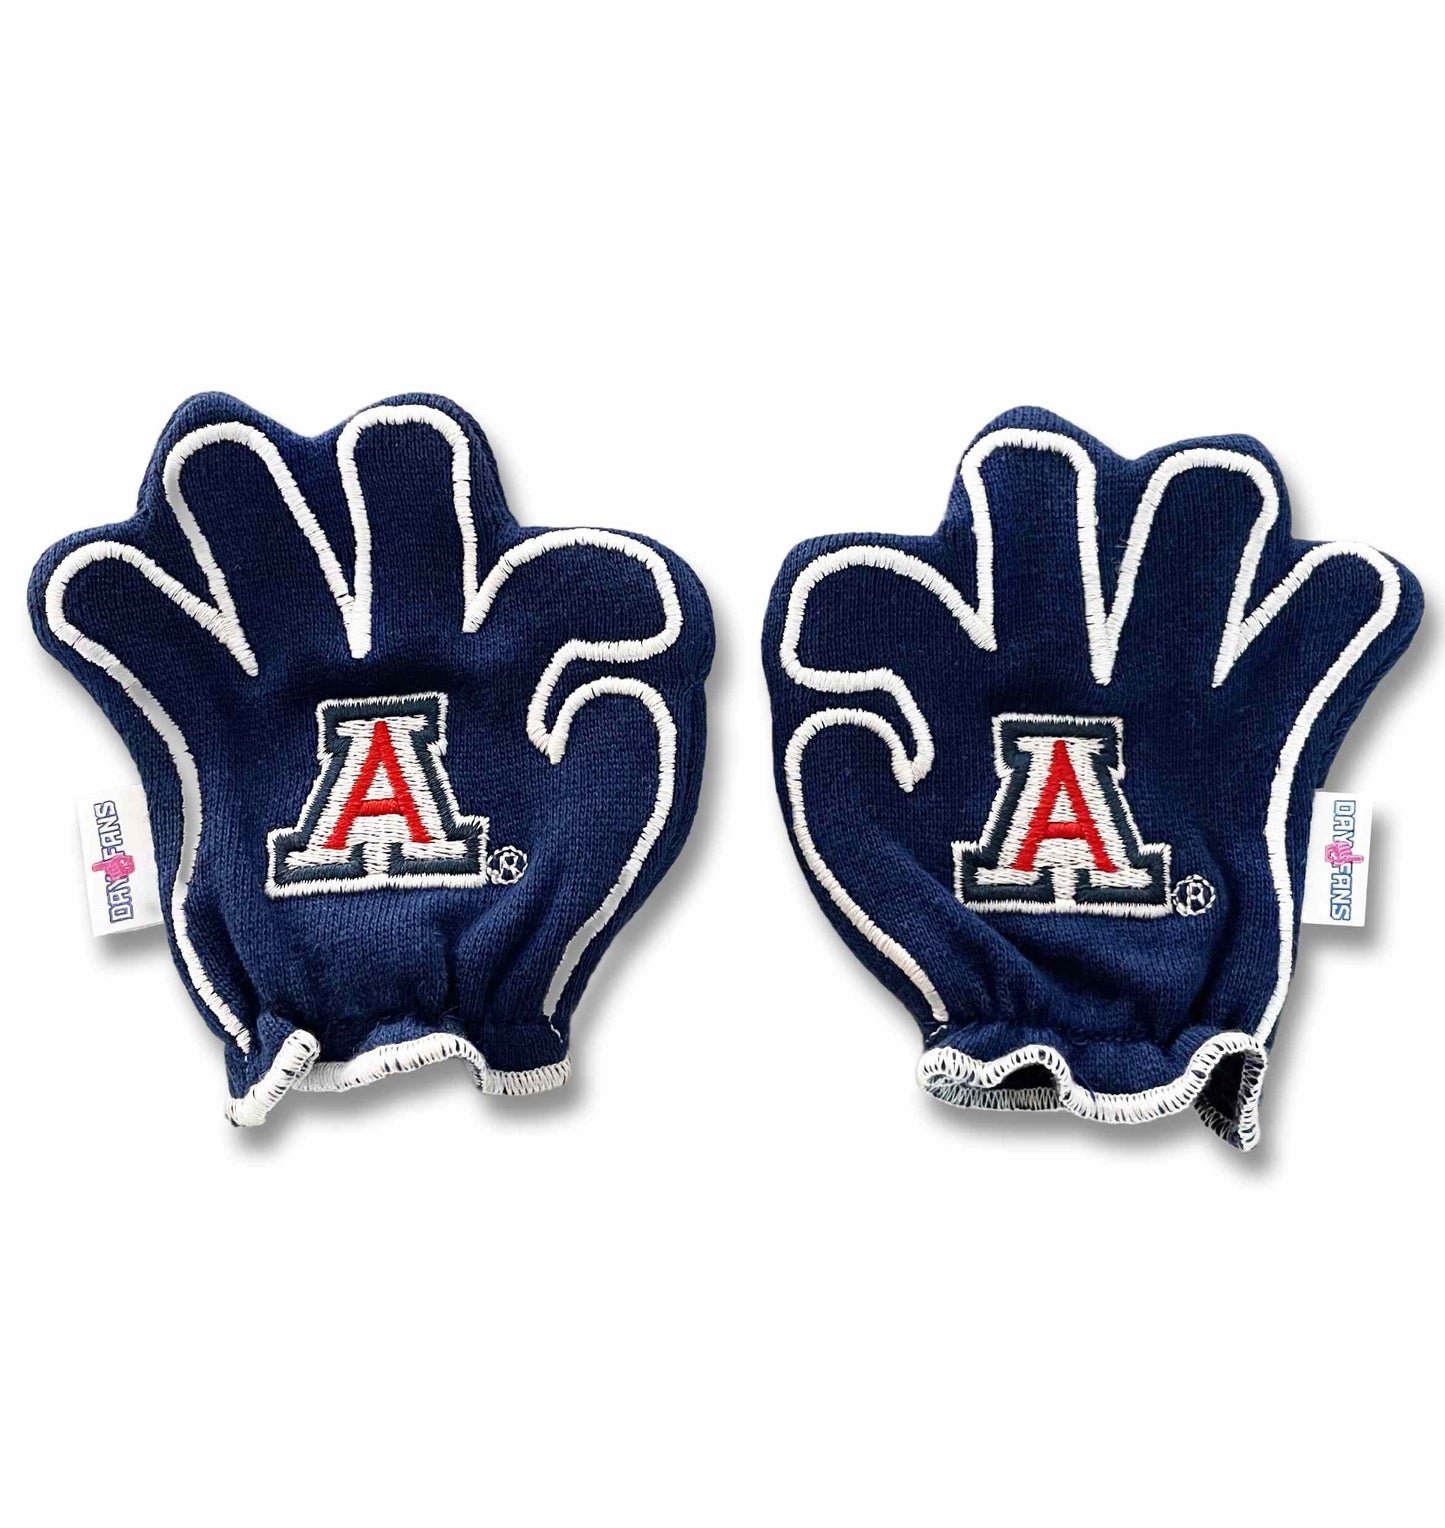 Arizona Bear Down FanMitts Baby Mittens Blue Back Pair